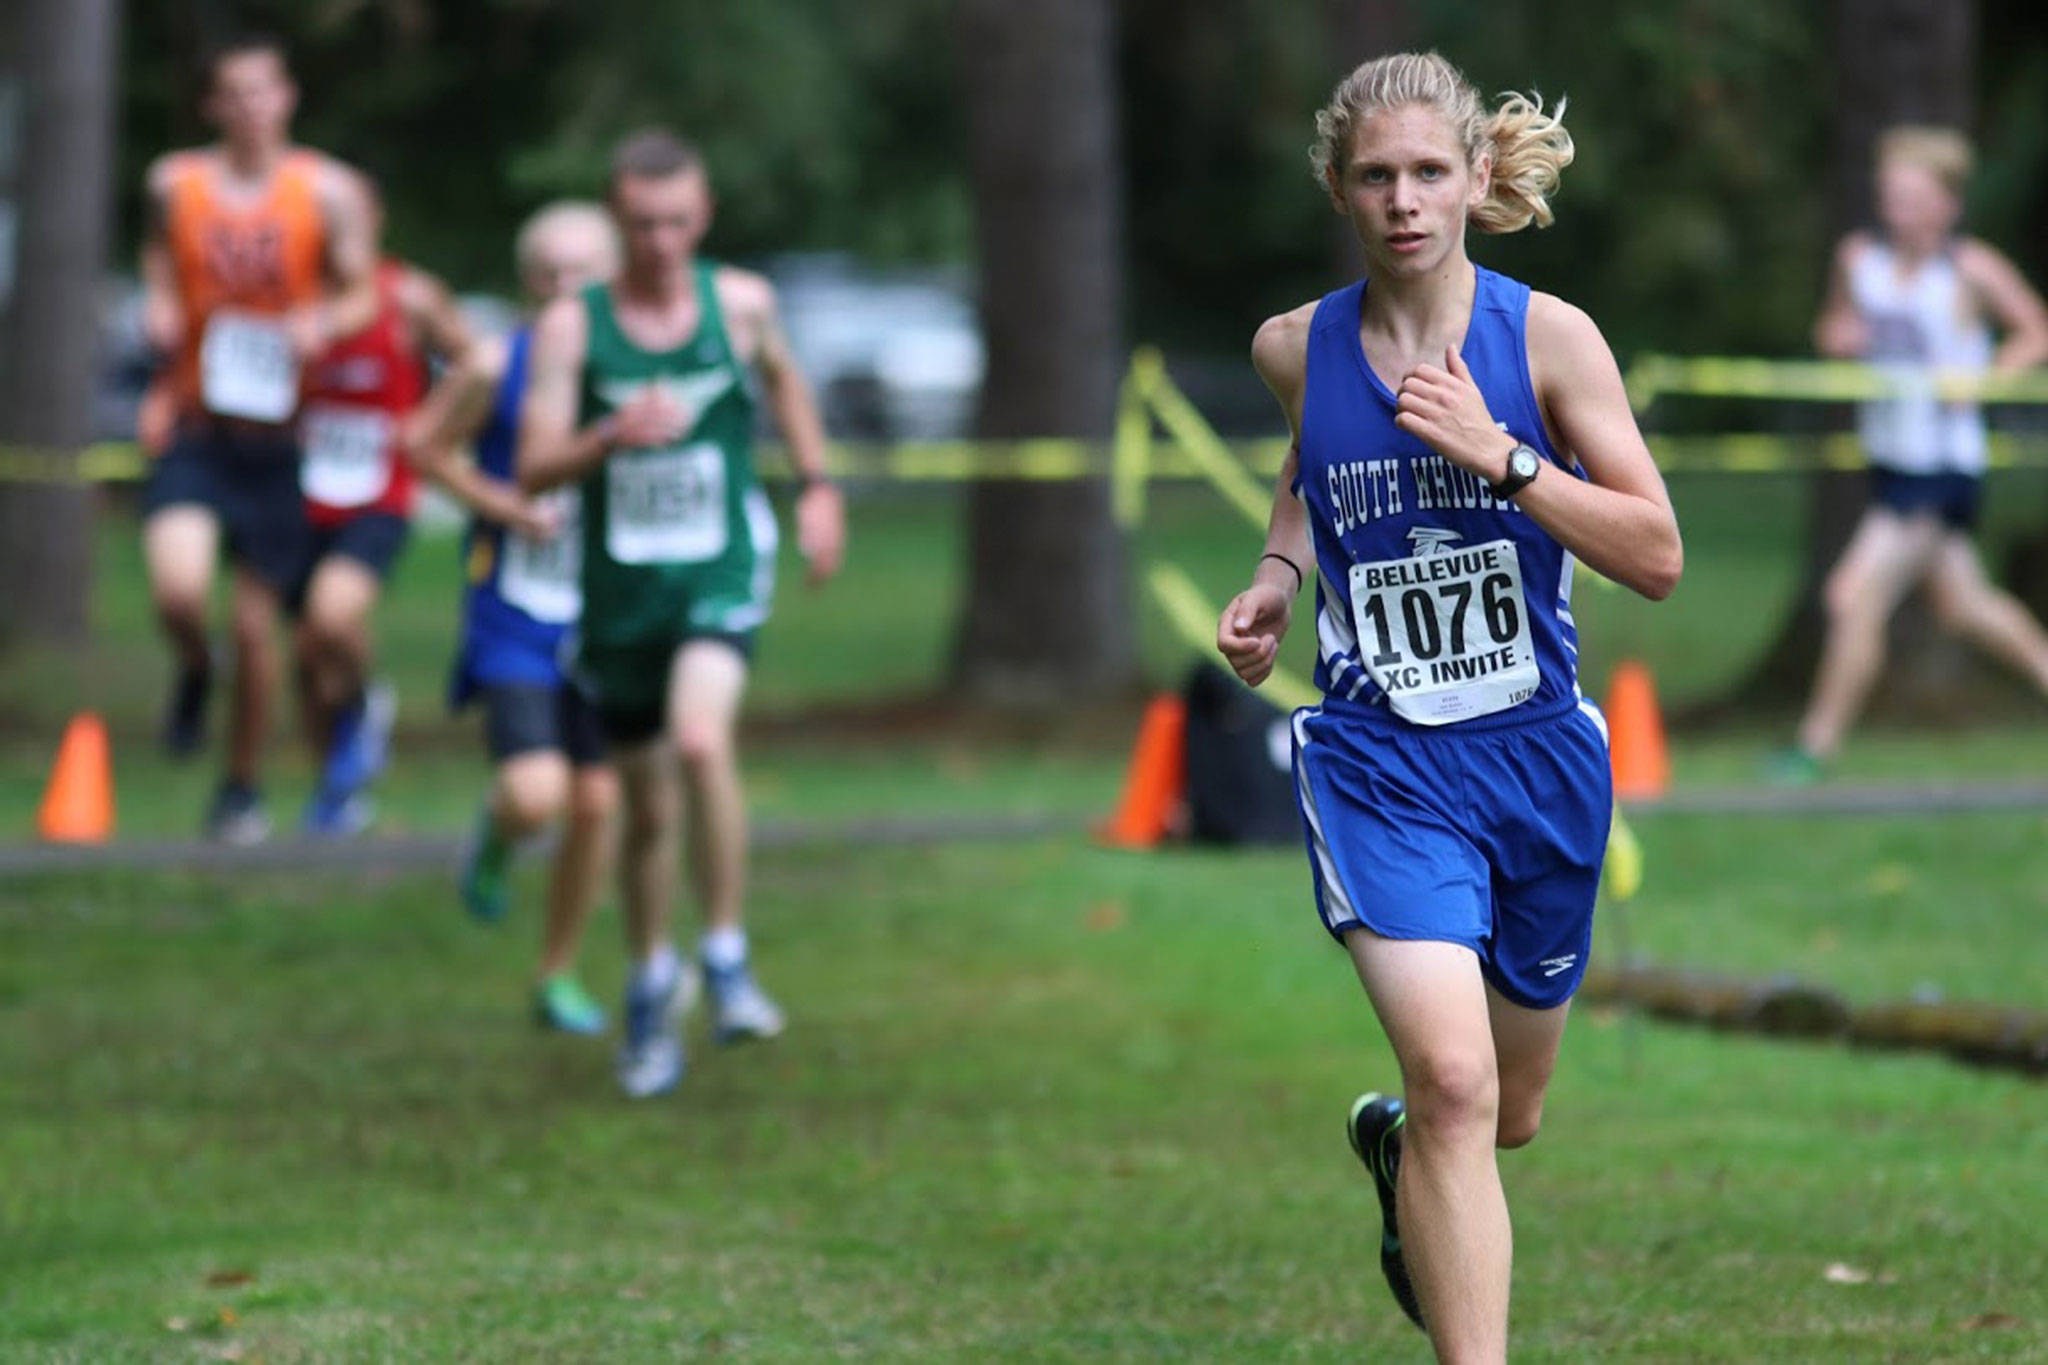 South Whidbey’s Sam Baesler competes in the Bellevue Invitational Cross Country Meet Saturday. (Photo by Matt Simms)